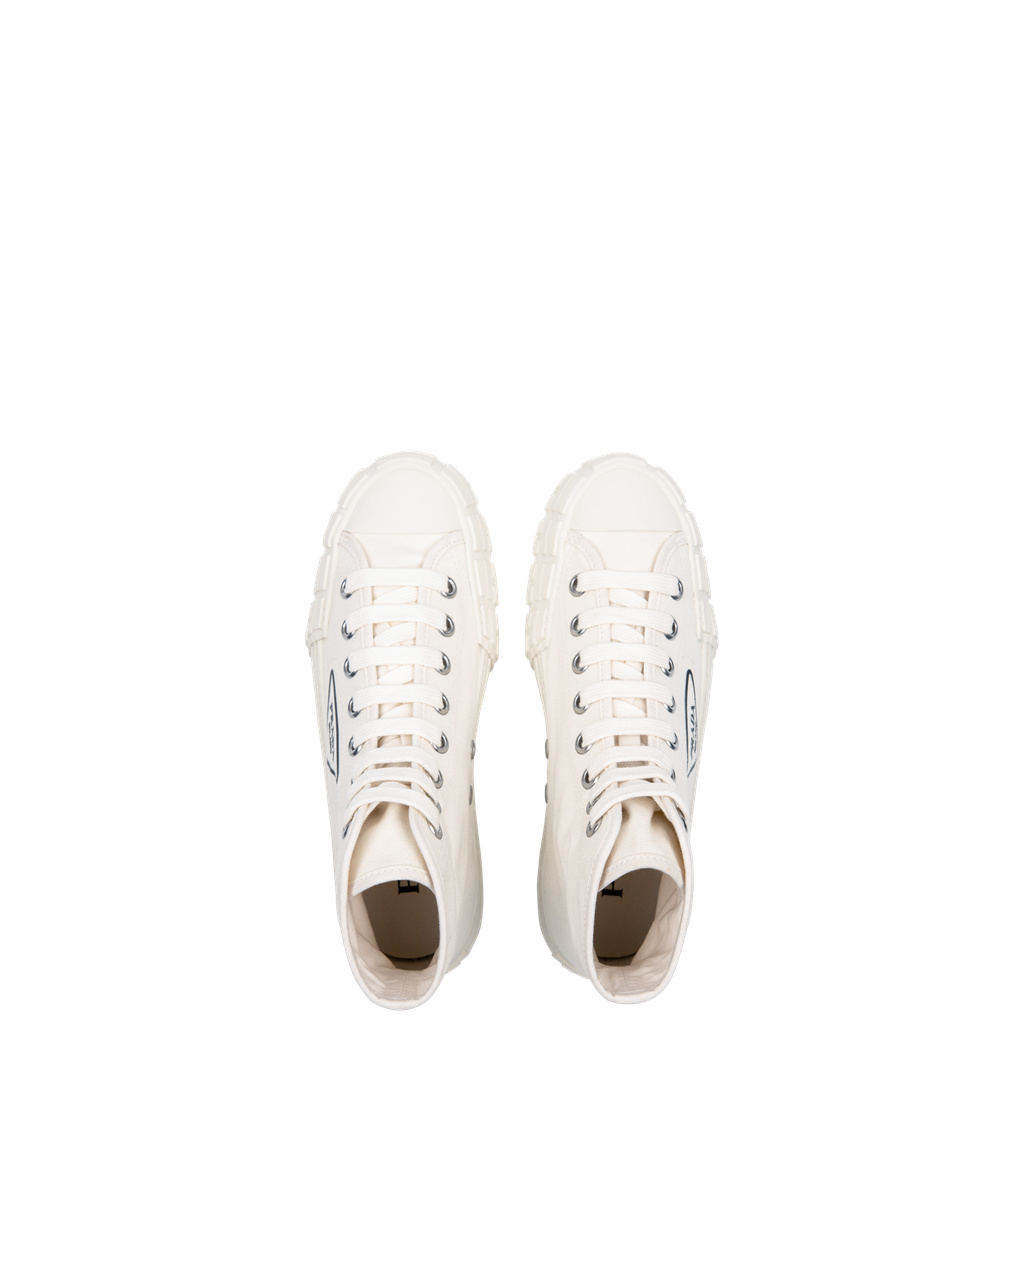 Prada Cotton Canvas High-top Sneakers South Africa Stores - Womens Sneakers  Ivory